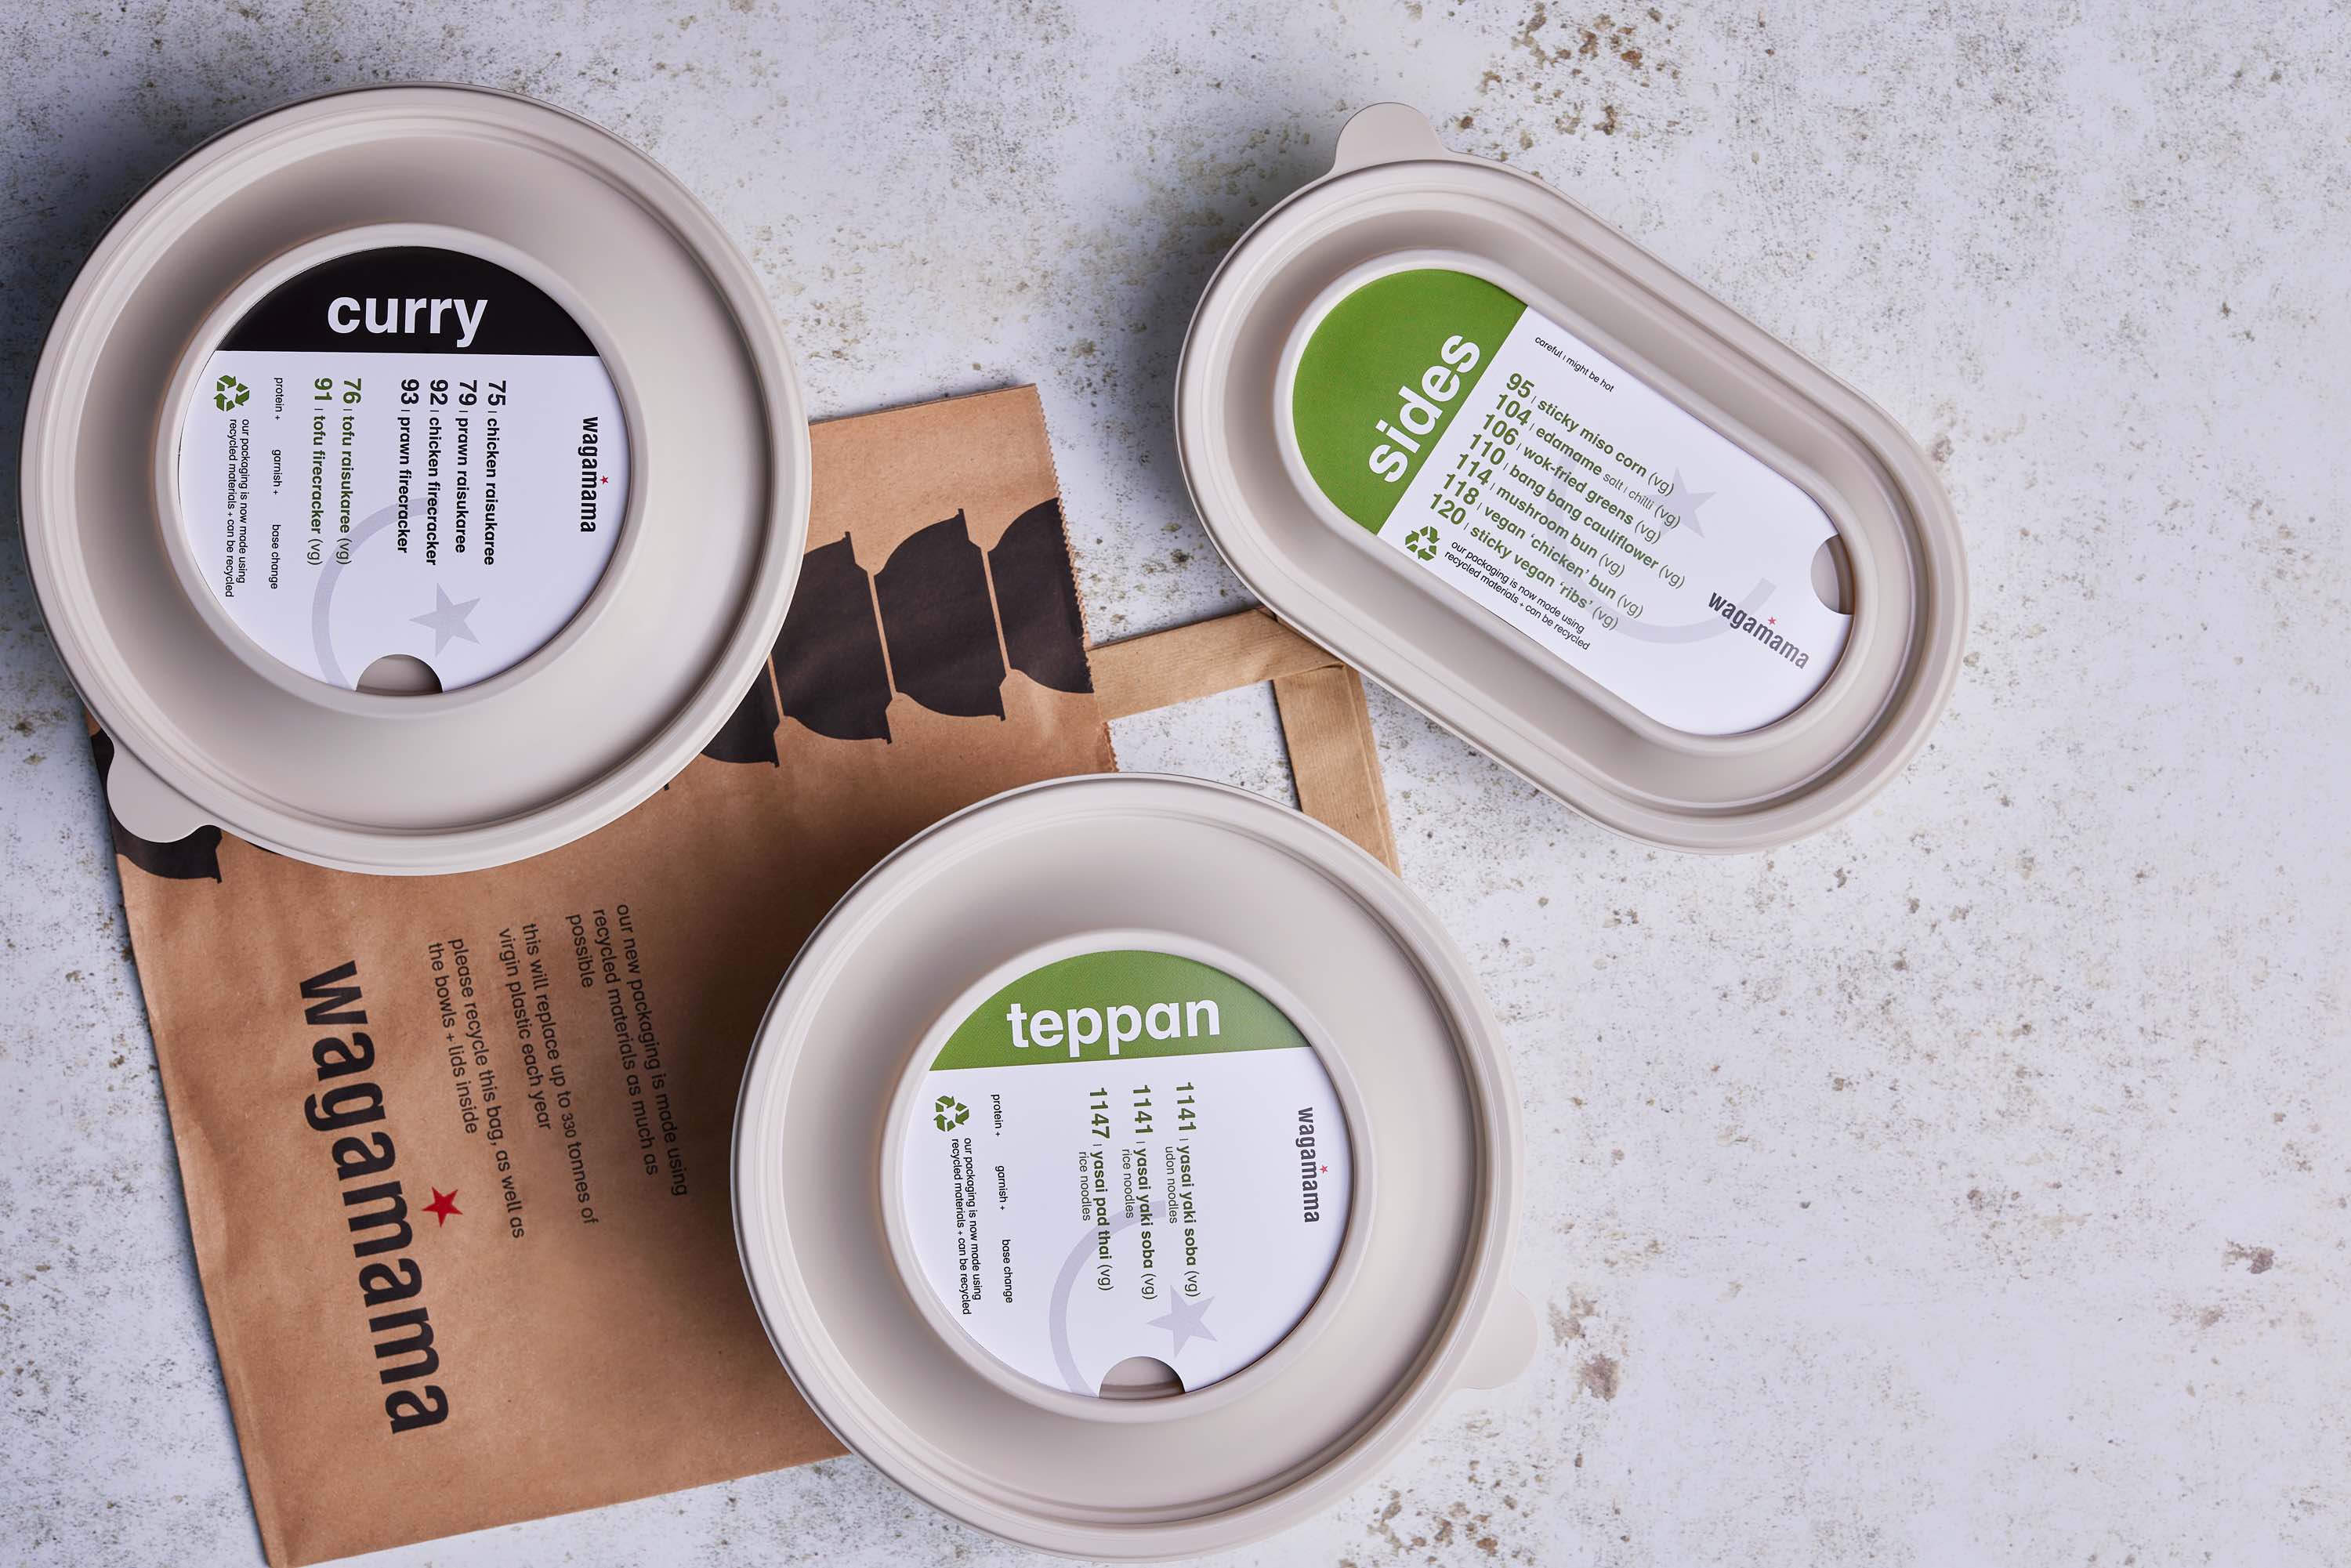 Wagamama Partners With Morrama To Create Sustainable Packaging Solution